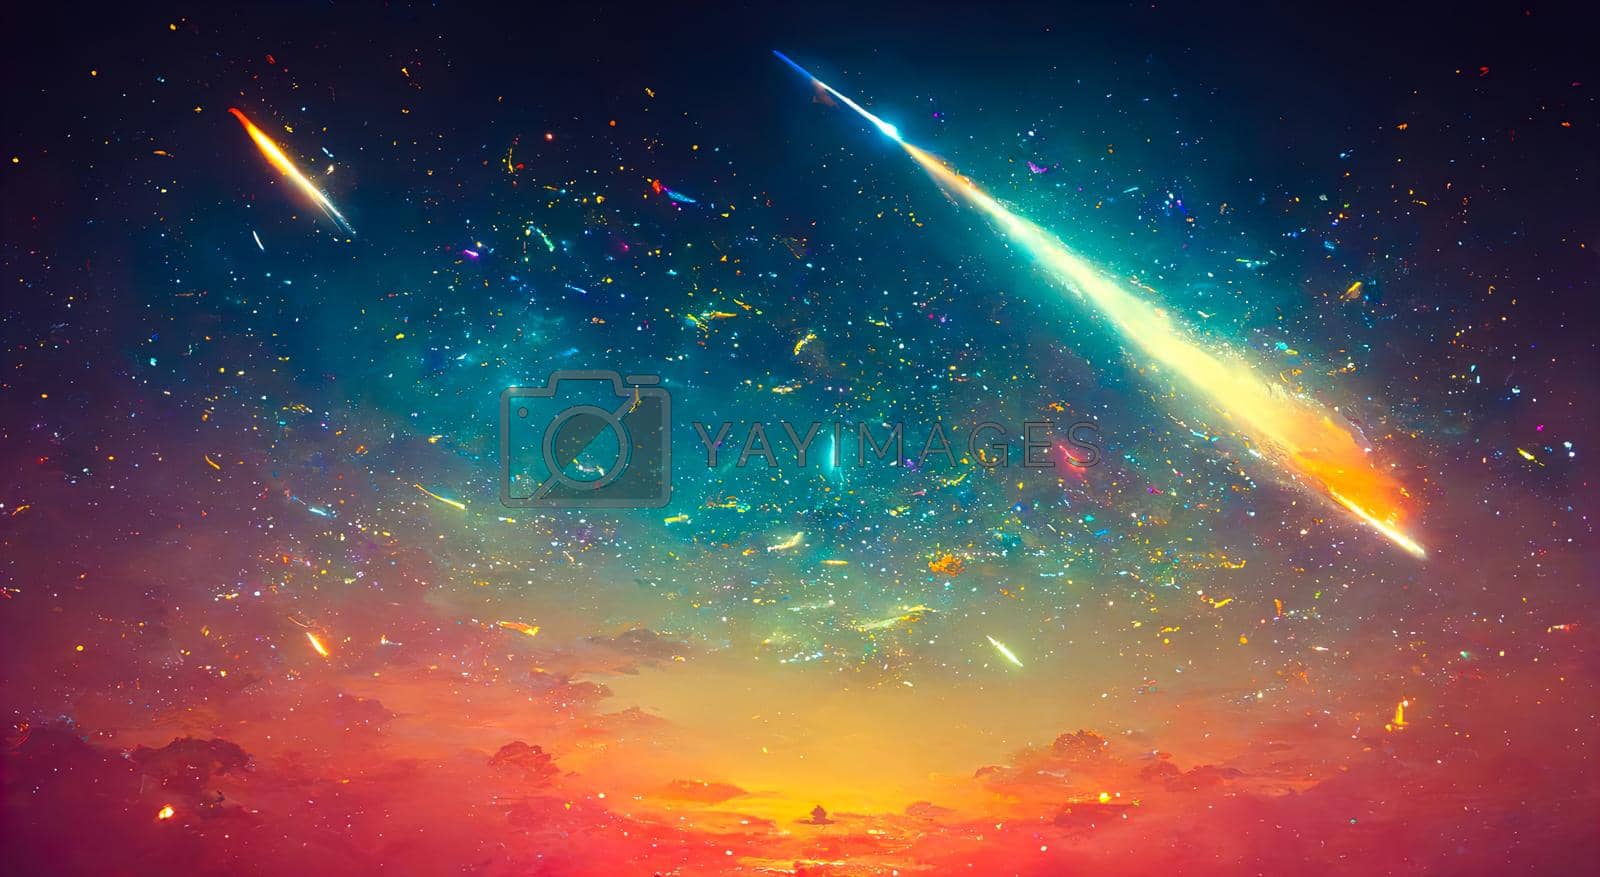 Royalty free image of abstract background of outer space with ultra bright stars and comets on the theme of explosions and life in space by TRMK